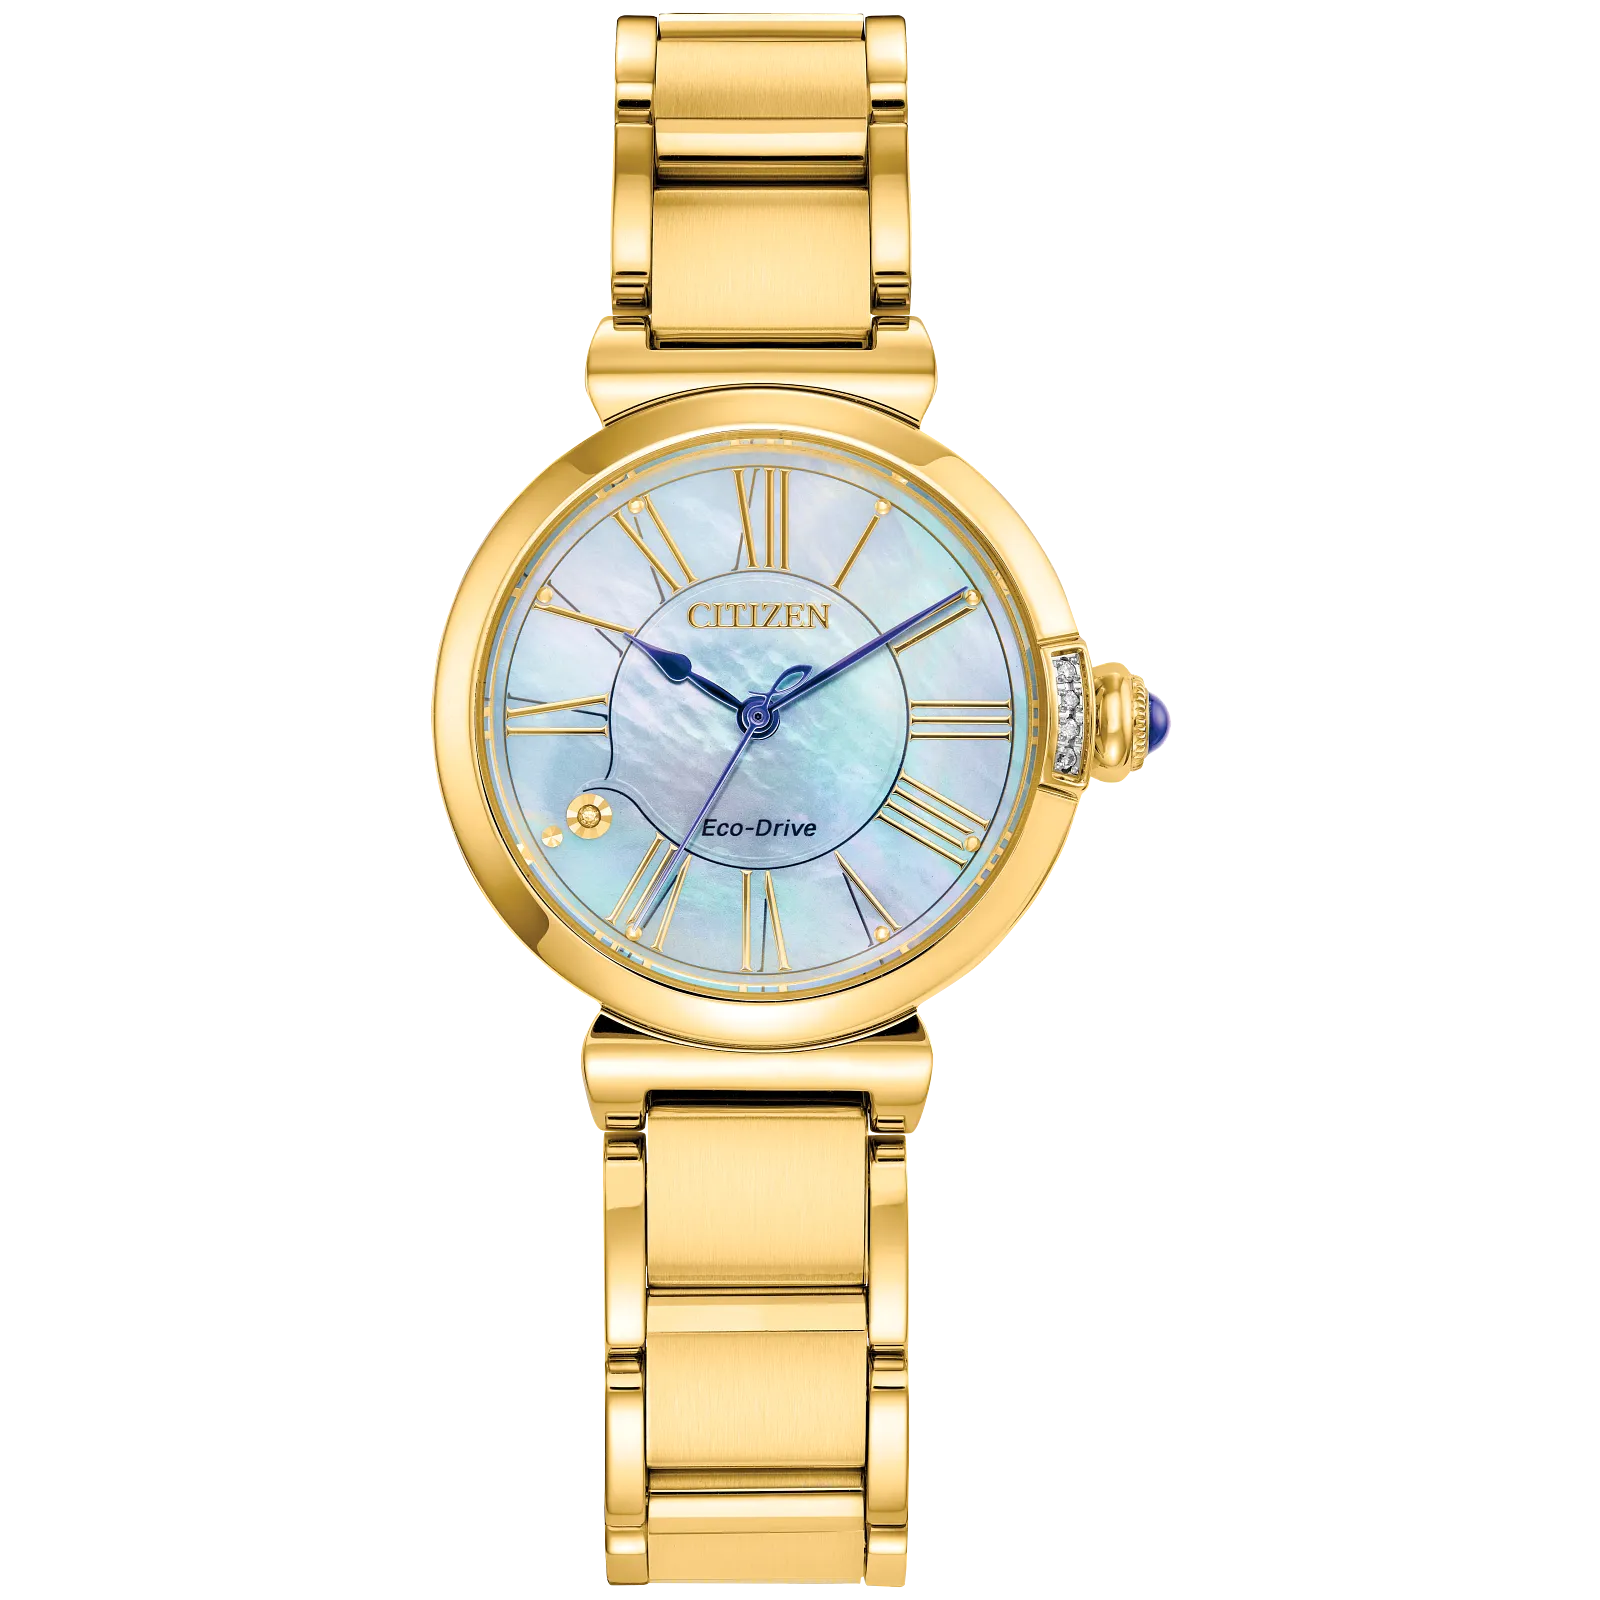 L Mae Watch by Citizen - Gold-Tone Stainless Steel Bracelet, Light Blue Dial, Eco-Drive Technology